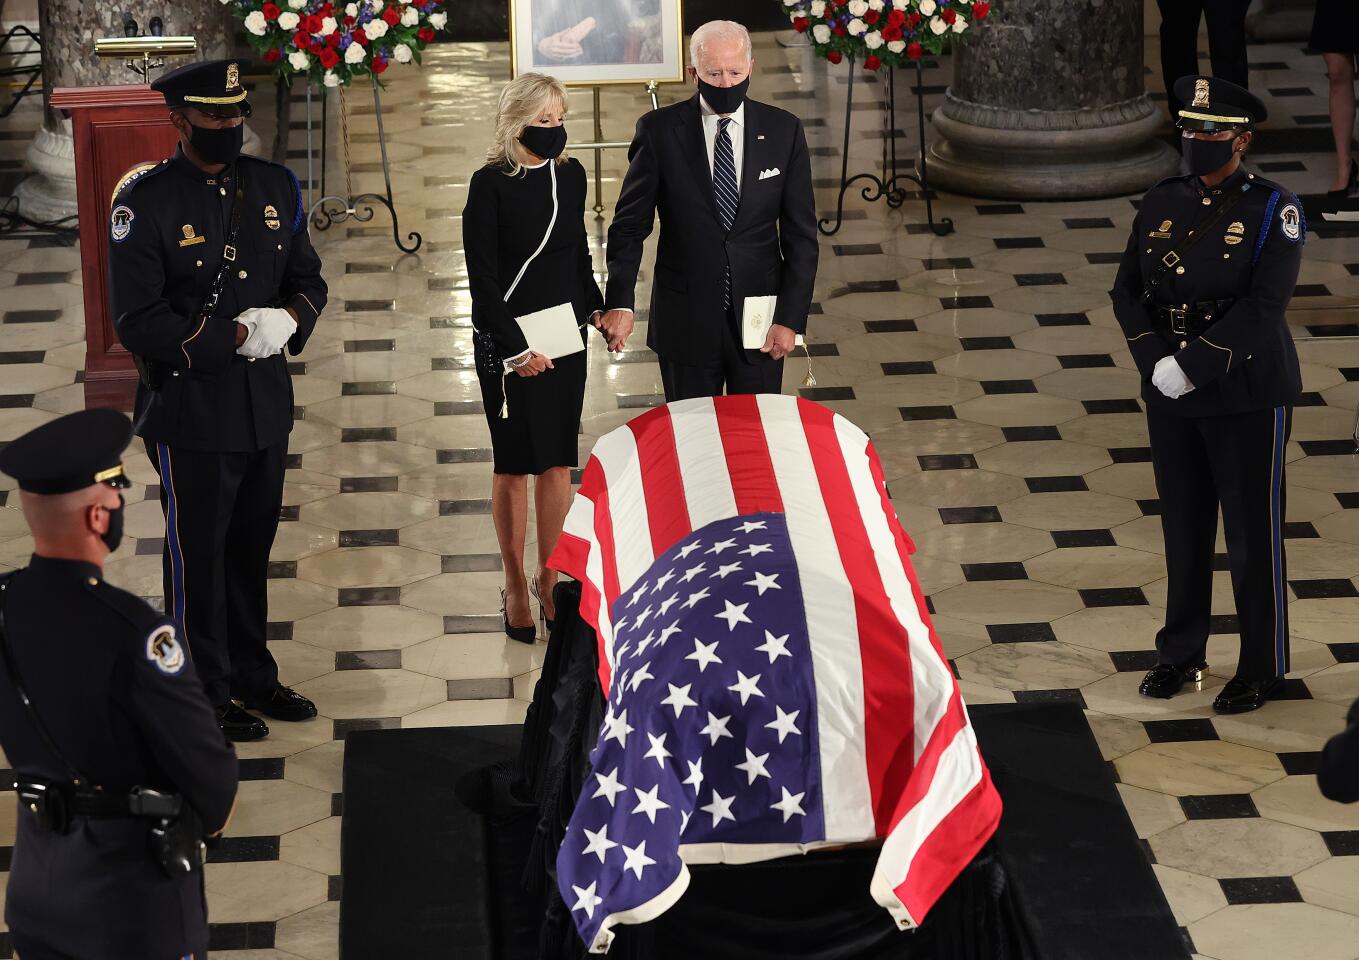 Joe Biden and his wife Jill Biden pay their respects to Justice Ruth Bader Ginsburg